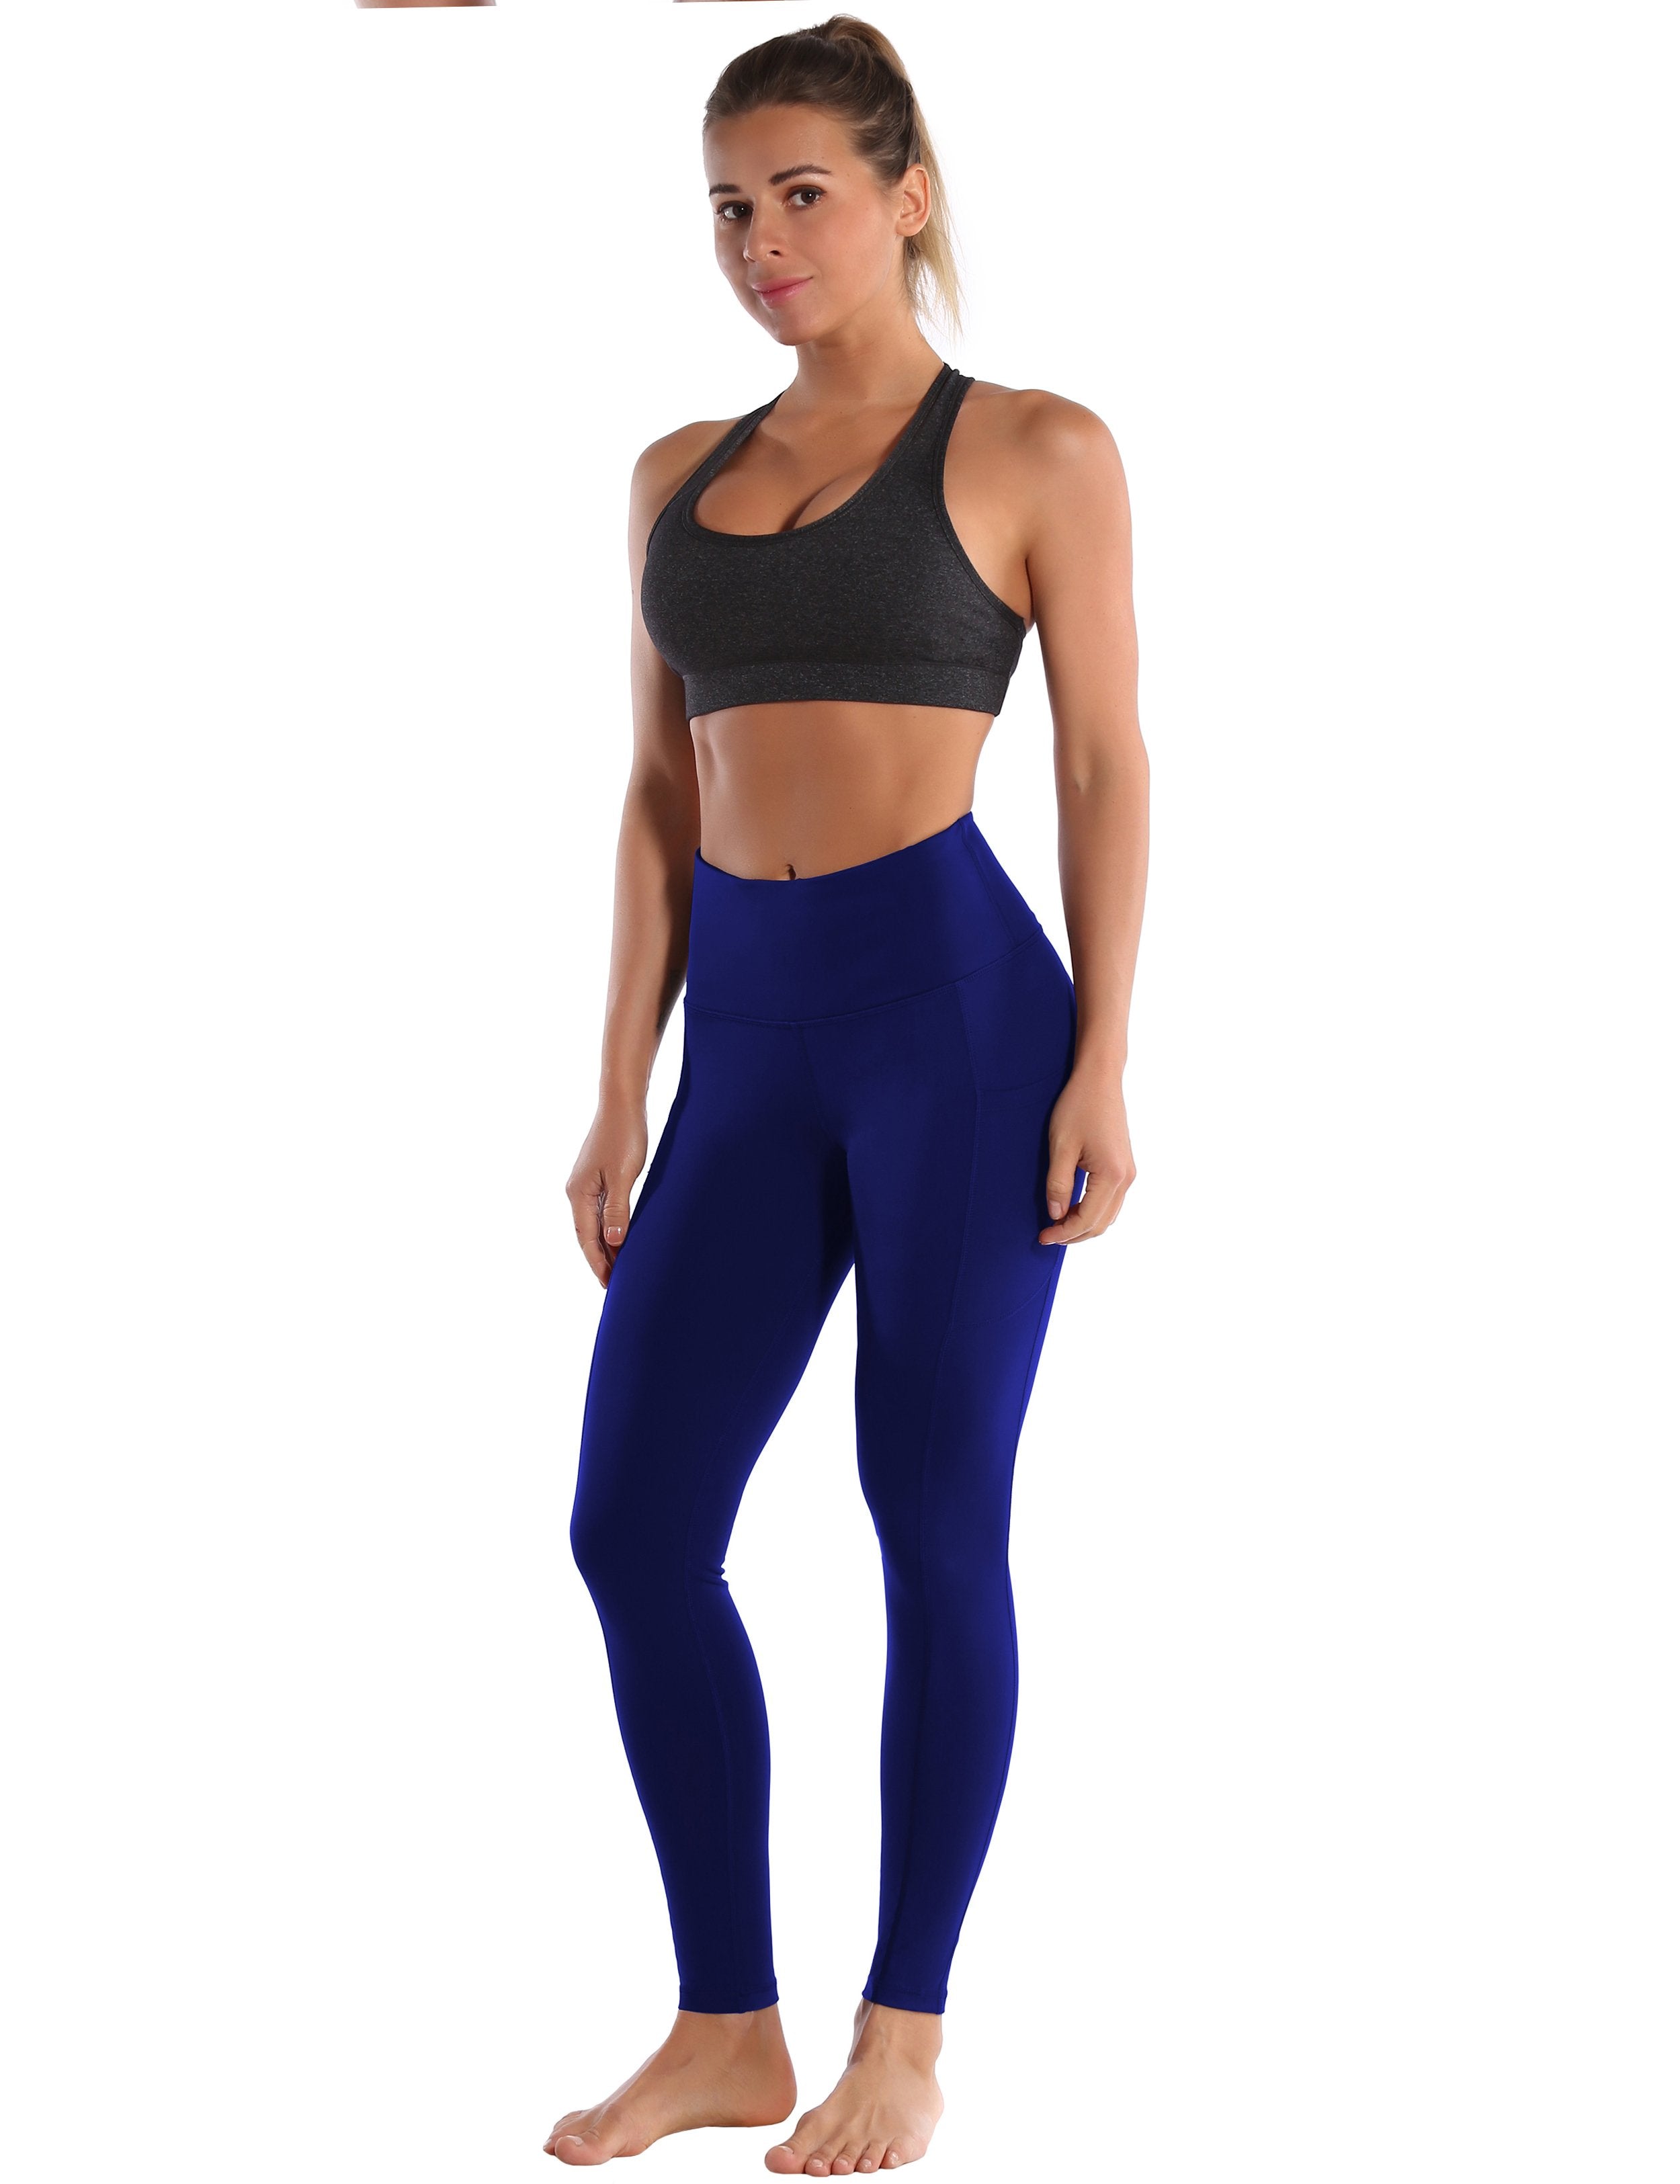 Hip Line Side Pockets Running Pants navy Sexy Hip Line Side Pockets 75%Nylon/25%Spandex Fabric doesn't attract lint easily 4-way stretch No see-through Moisture-wicking Tummy control Inner pocket Two lengths